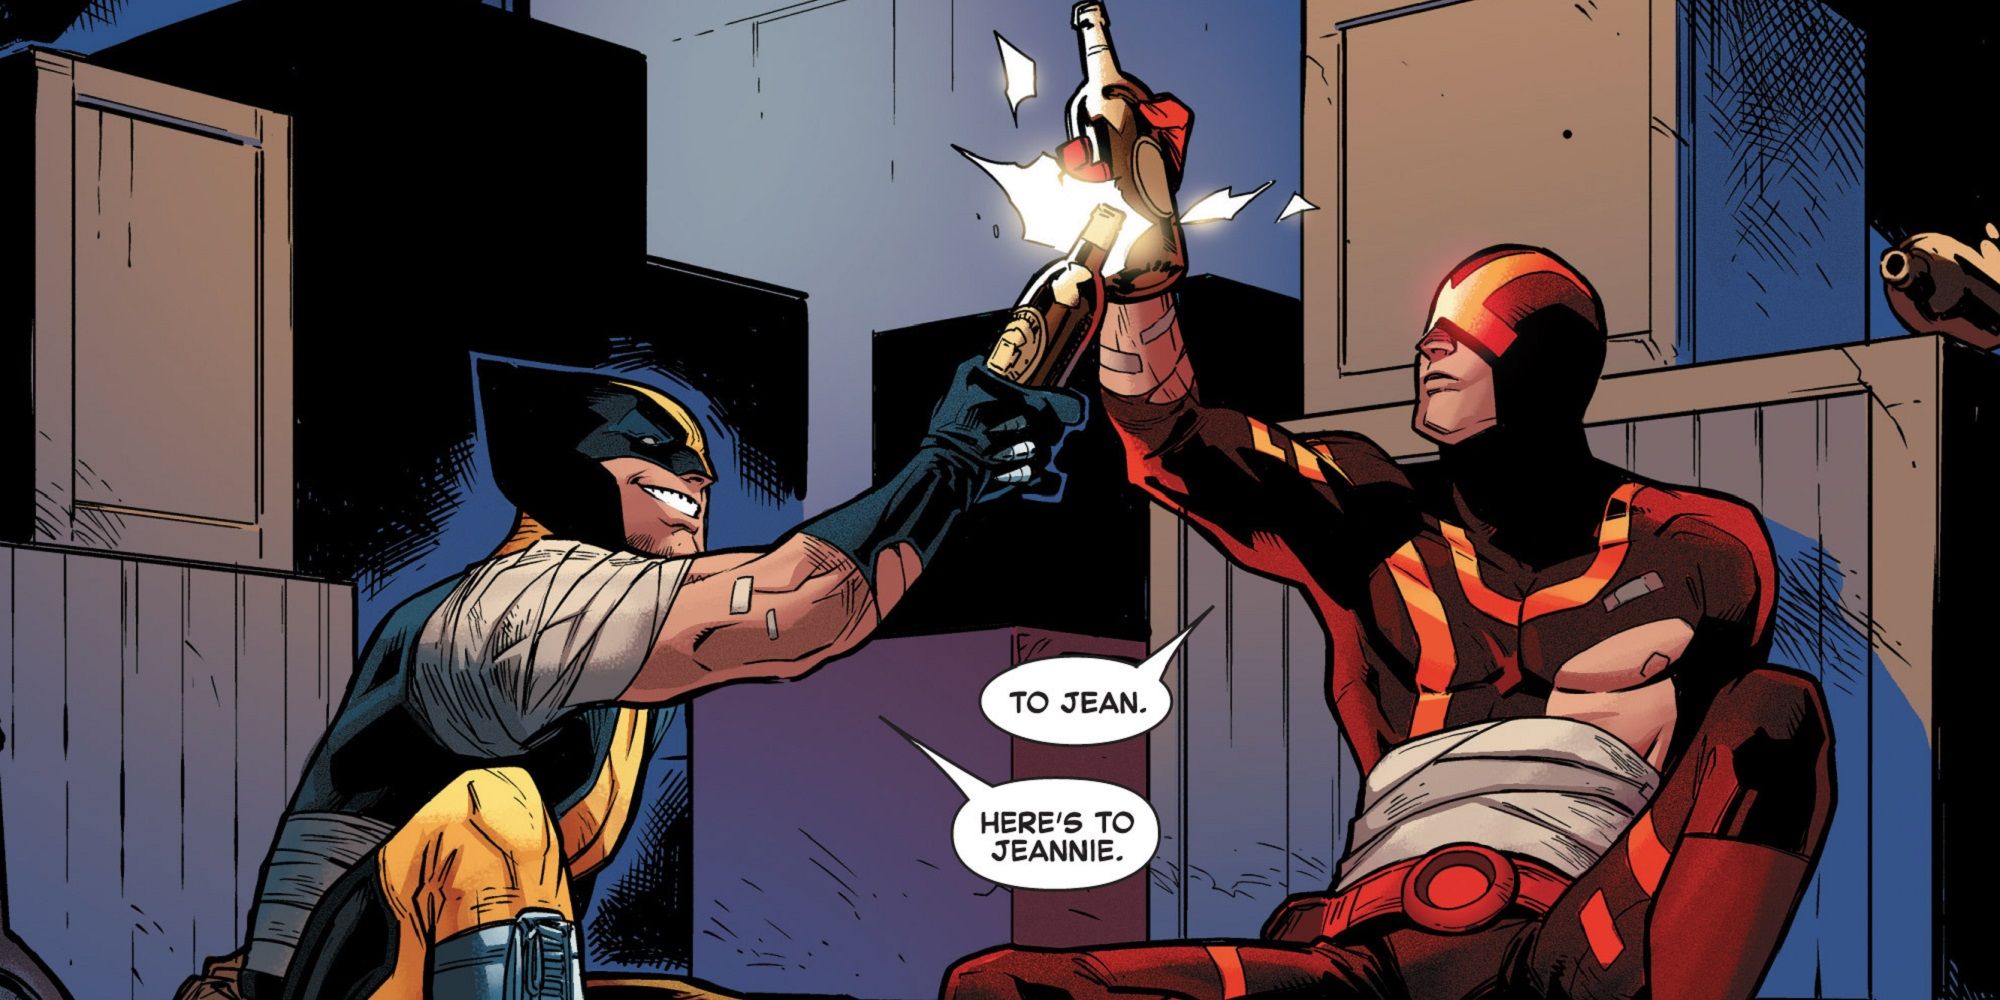 Wolverine and Cyclops bandaged up and toasting to Jean Grey